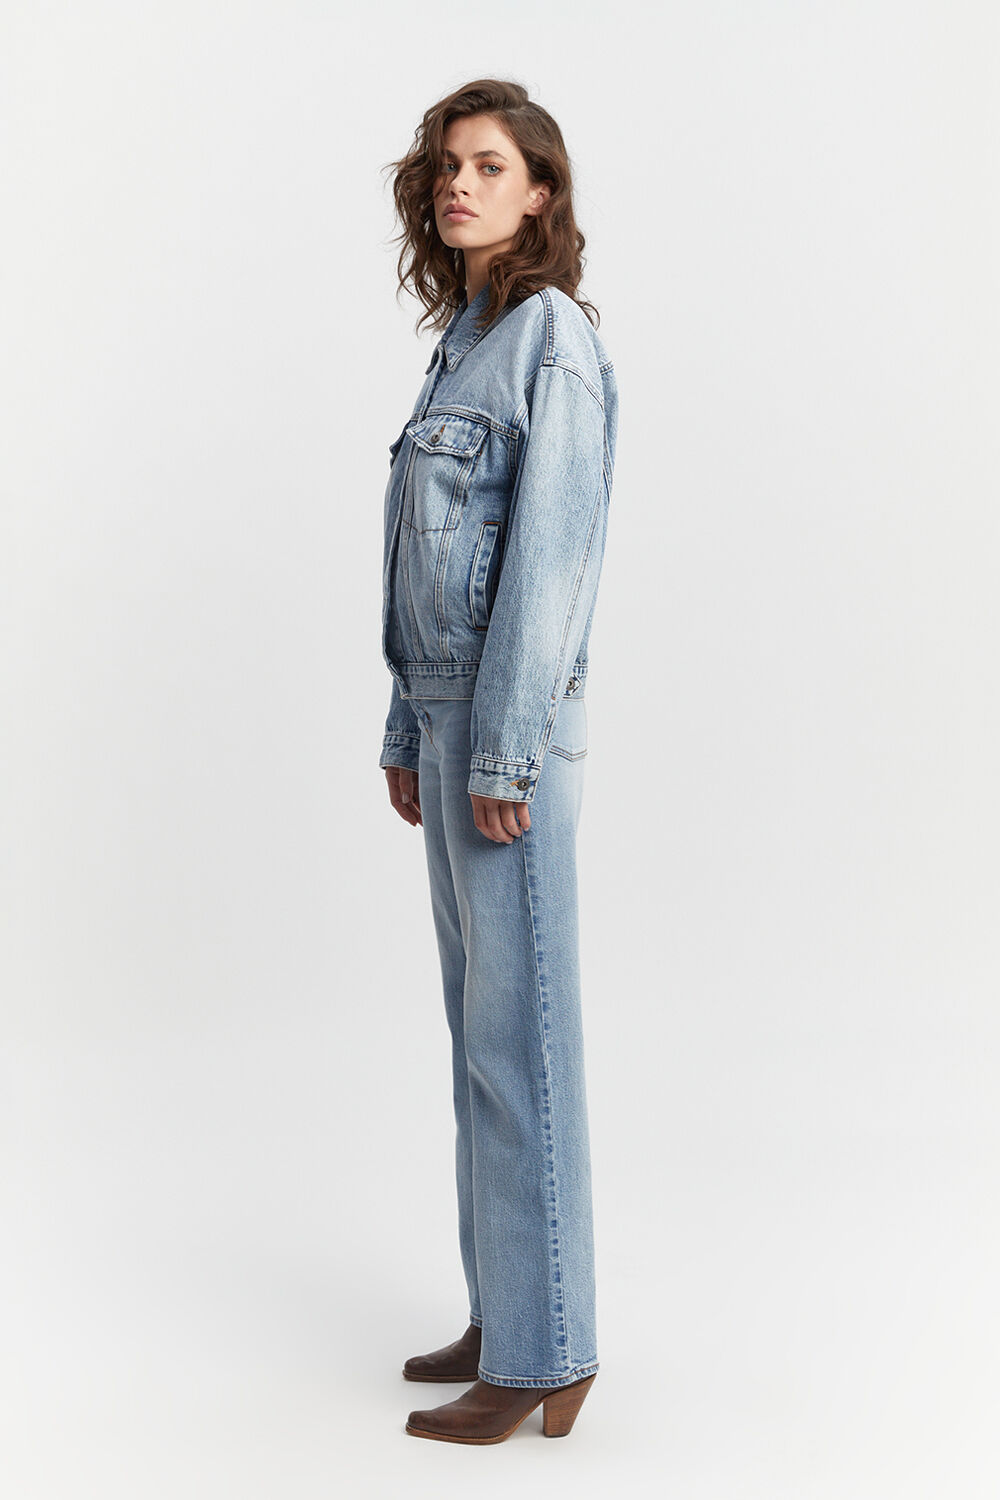 RELAXED DENIM JACKET in colour CITADEL